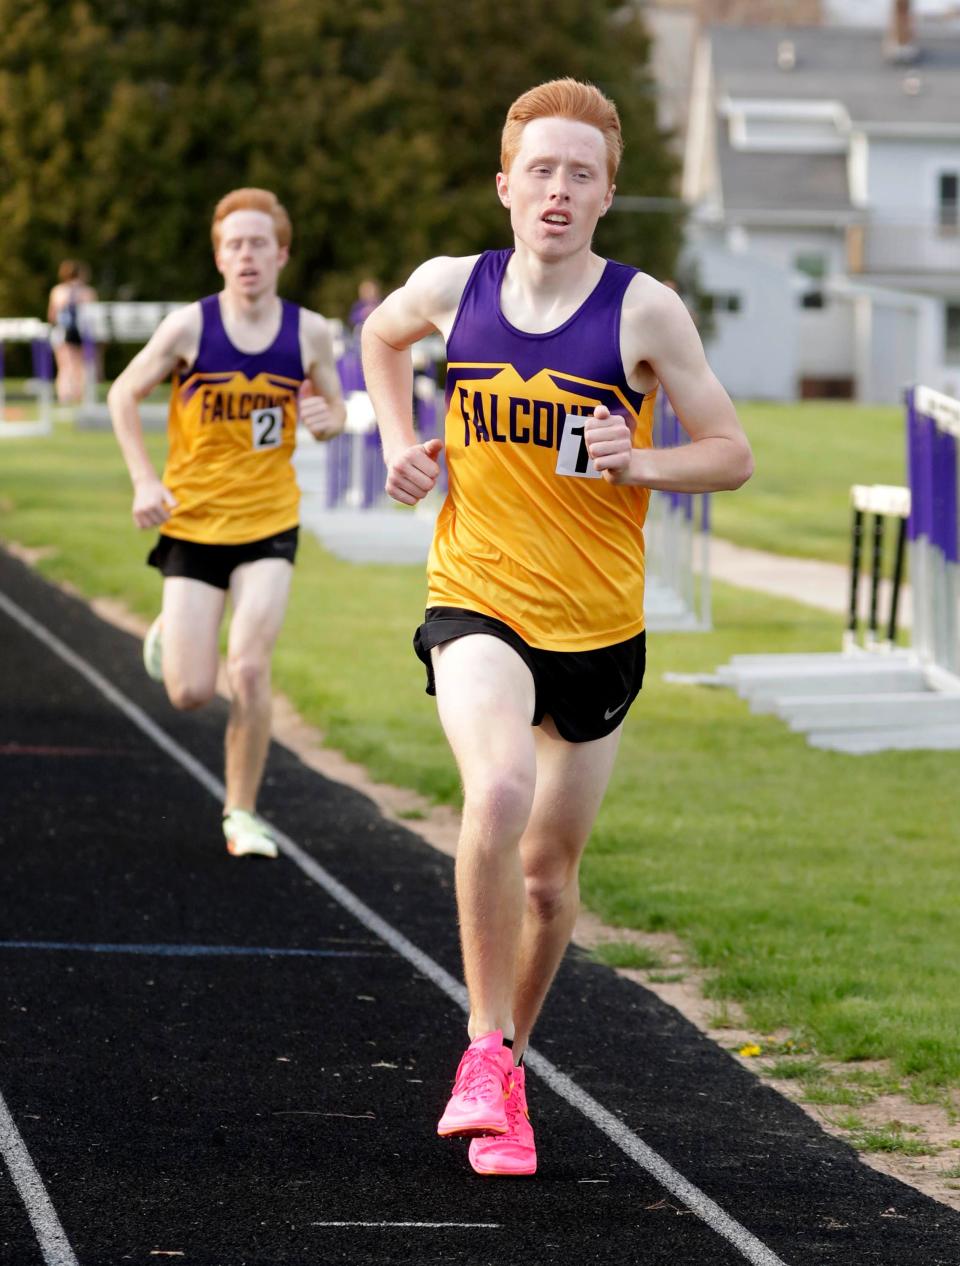 Brothers Logan Murphy, left, and Conner Murphy brought in the top times in the 1600-meter run during the VanderPan Invitational meet, Friday, May 5, 2023, in Sheboygan Falls, Wis.